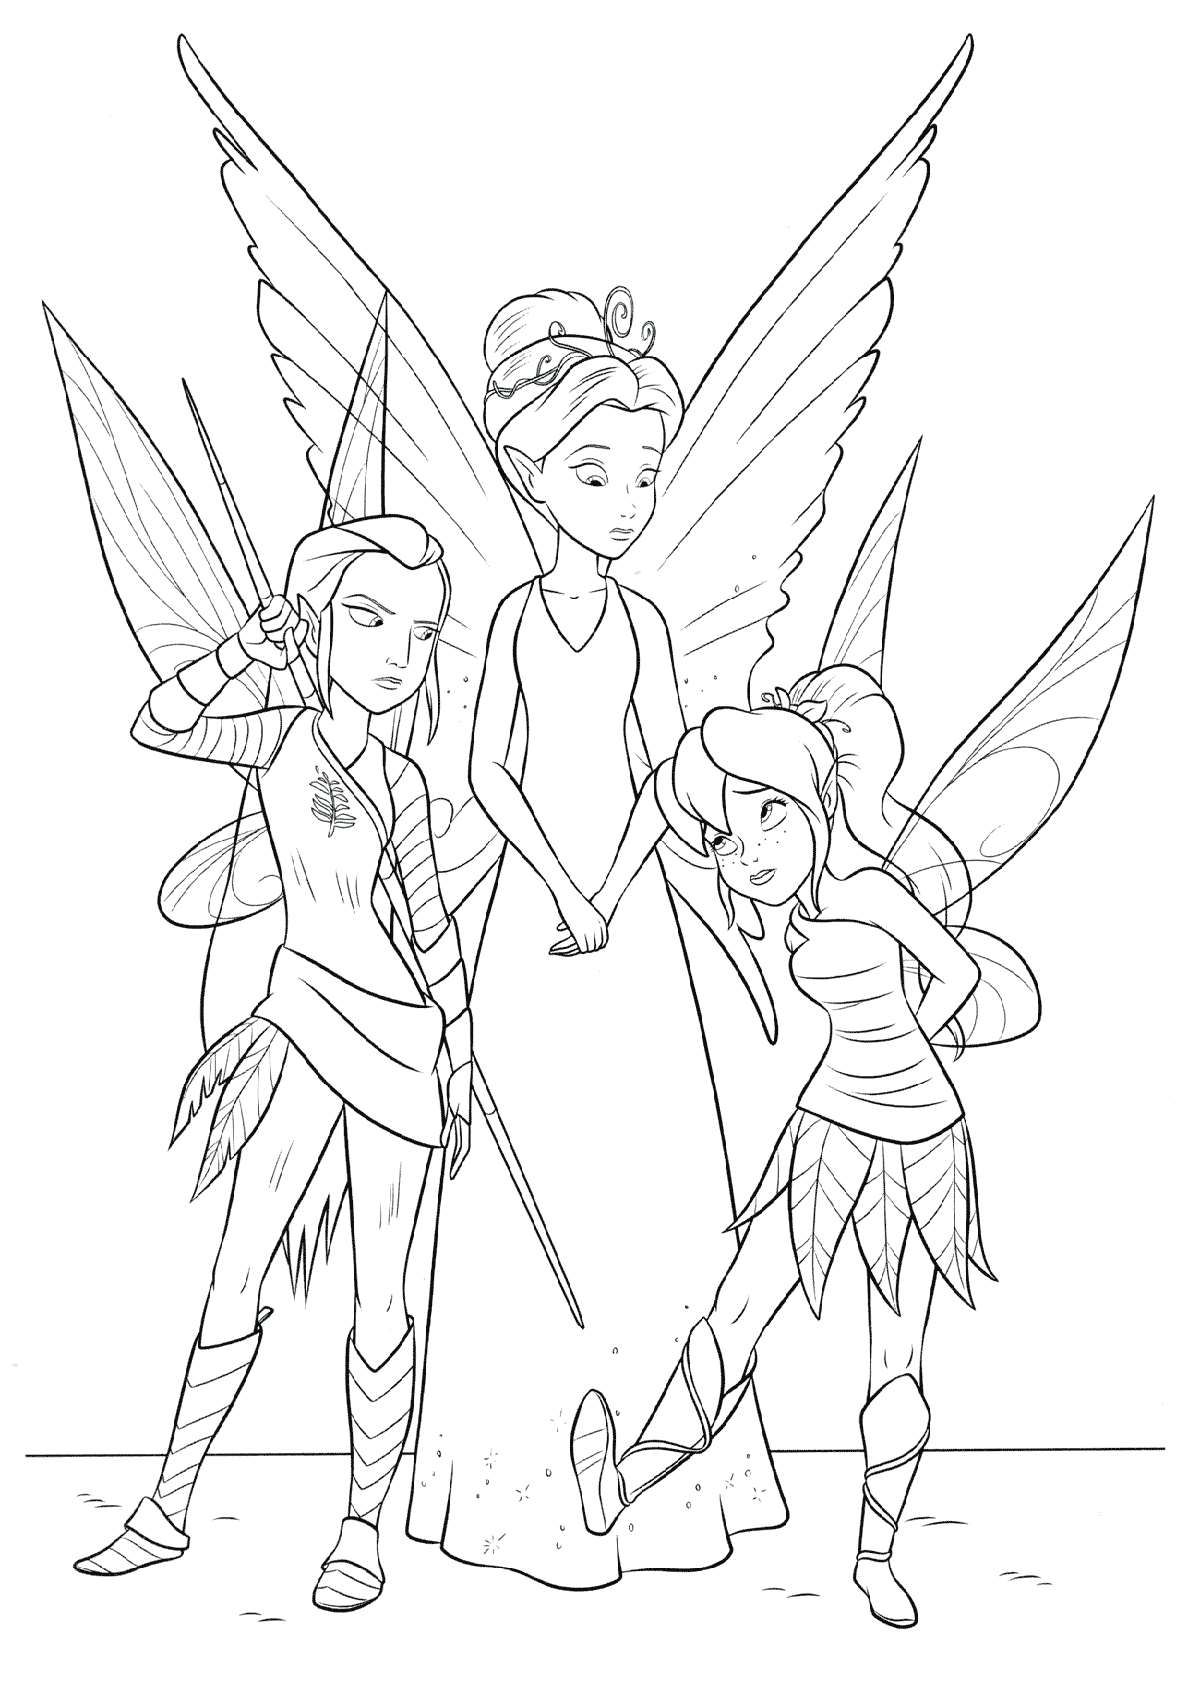 Tinker Bell and the Legend of the NeverBeast coloring pages to download